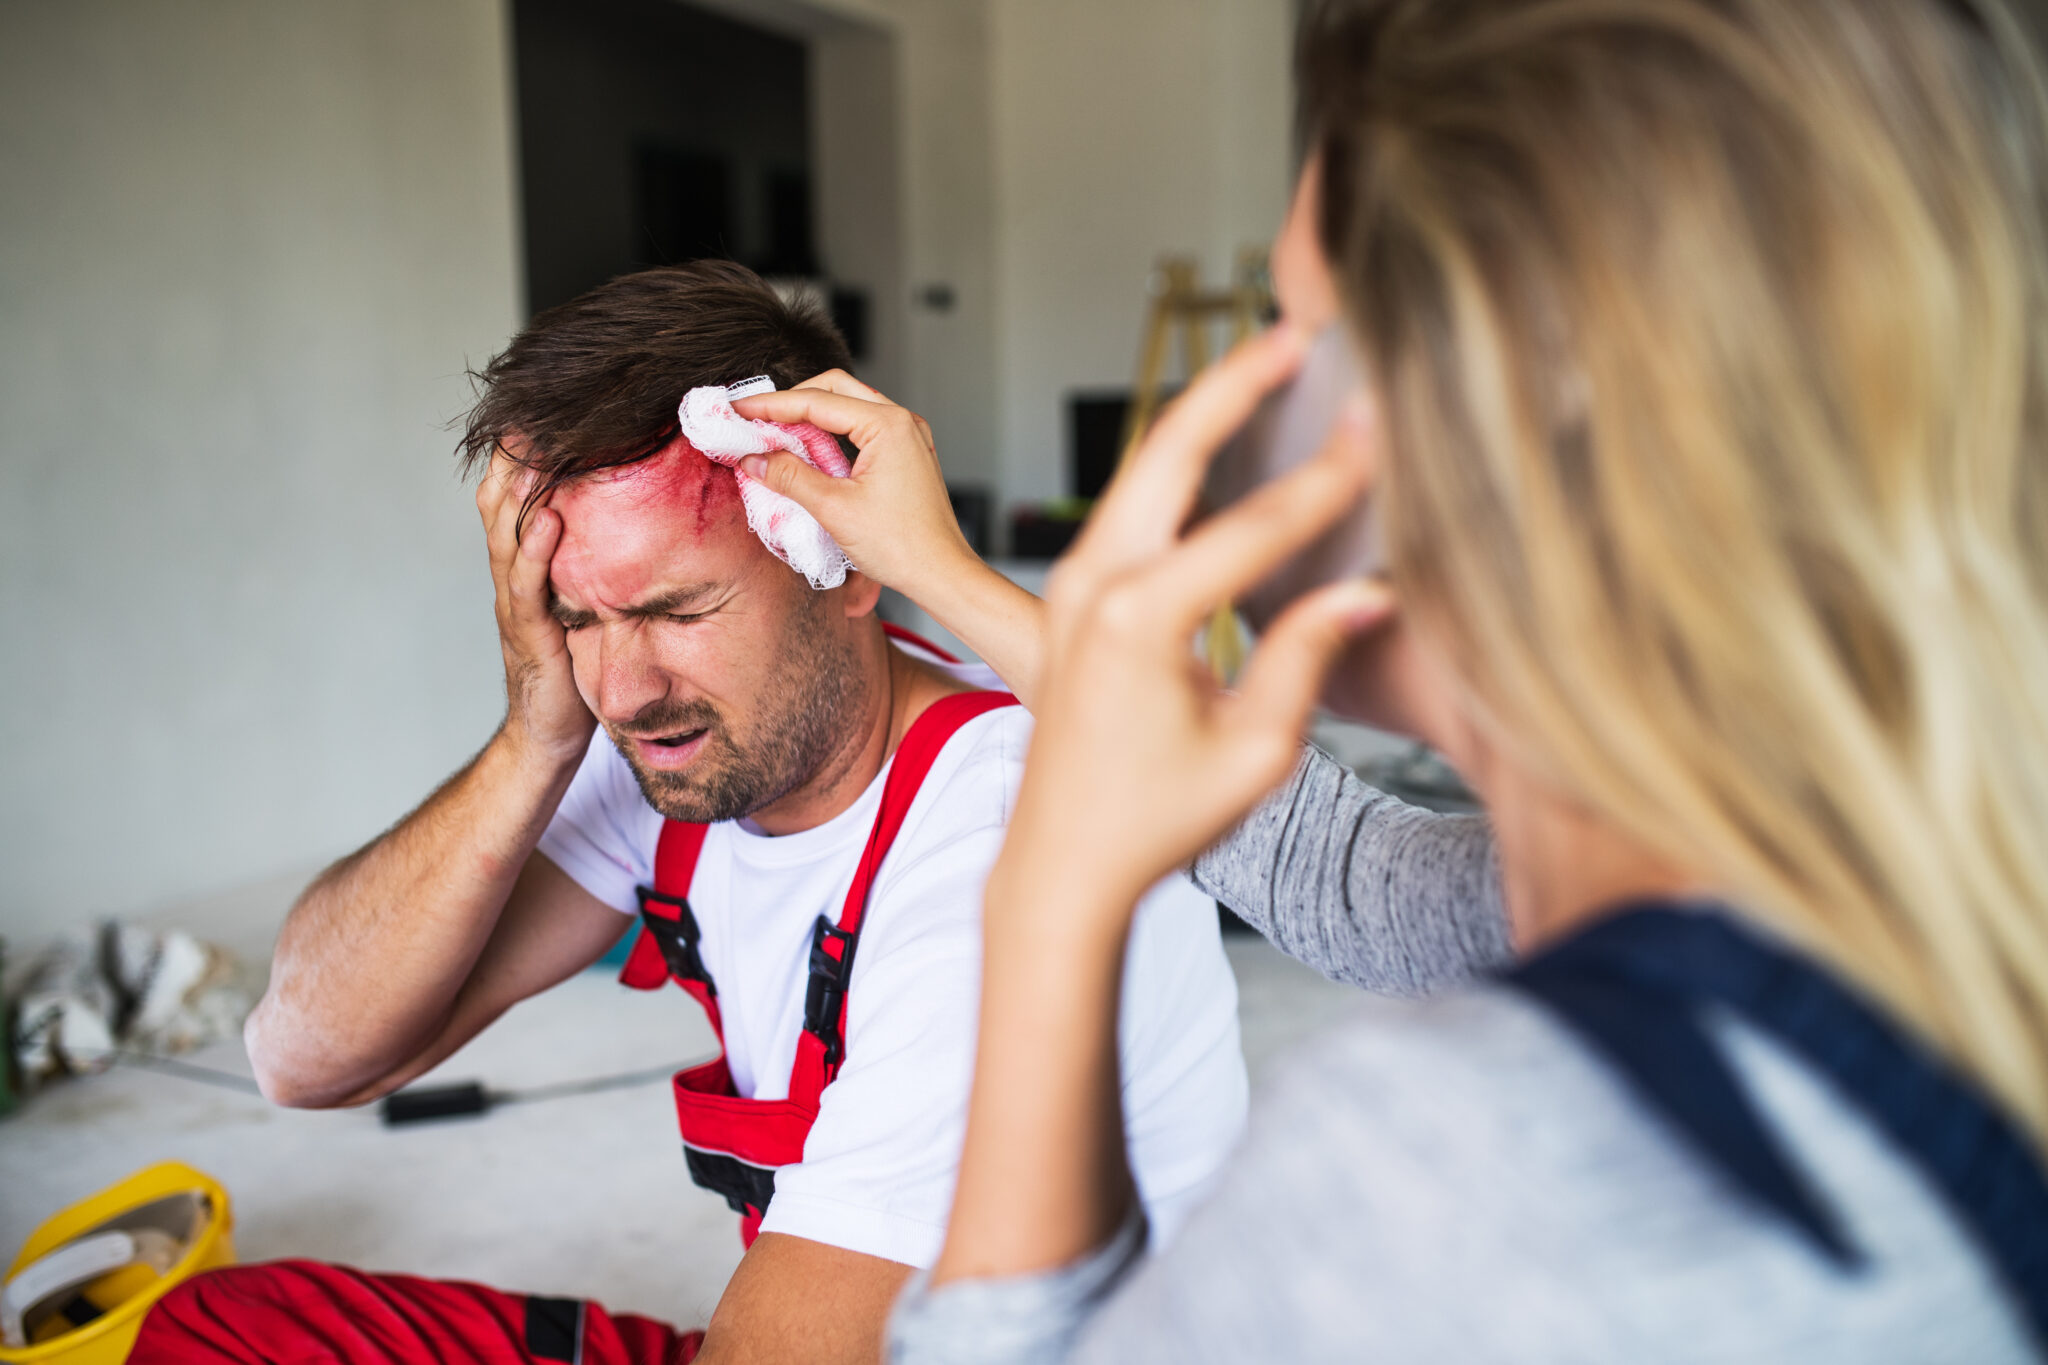 Filing a complaint to late, 30 days after an injury like this head injury, is one of multiple workers' compensation mistakes